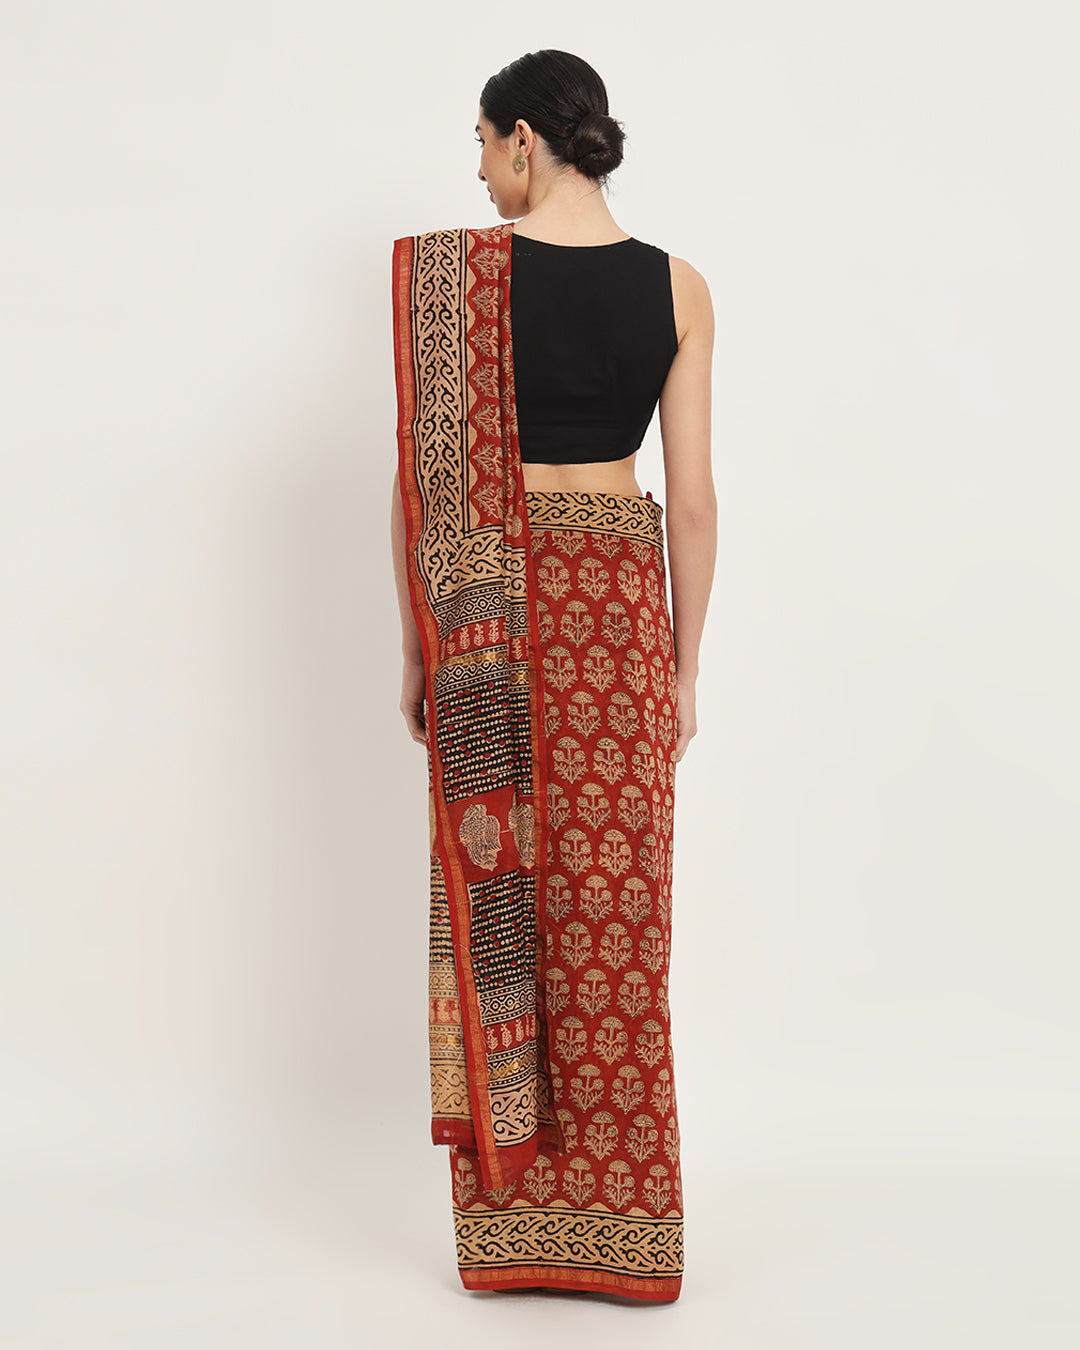 Red Dahlia - Blossoms in Every Fold Chanderi Silk Saree